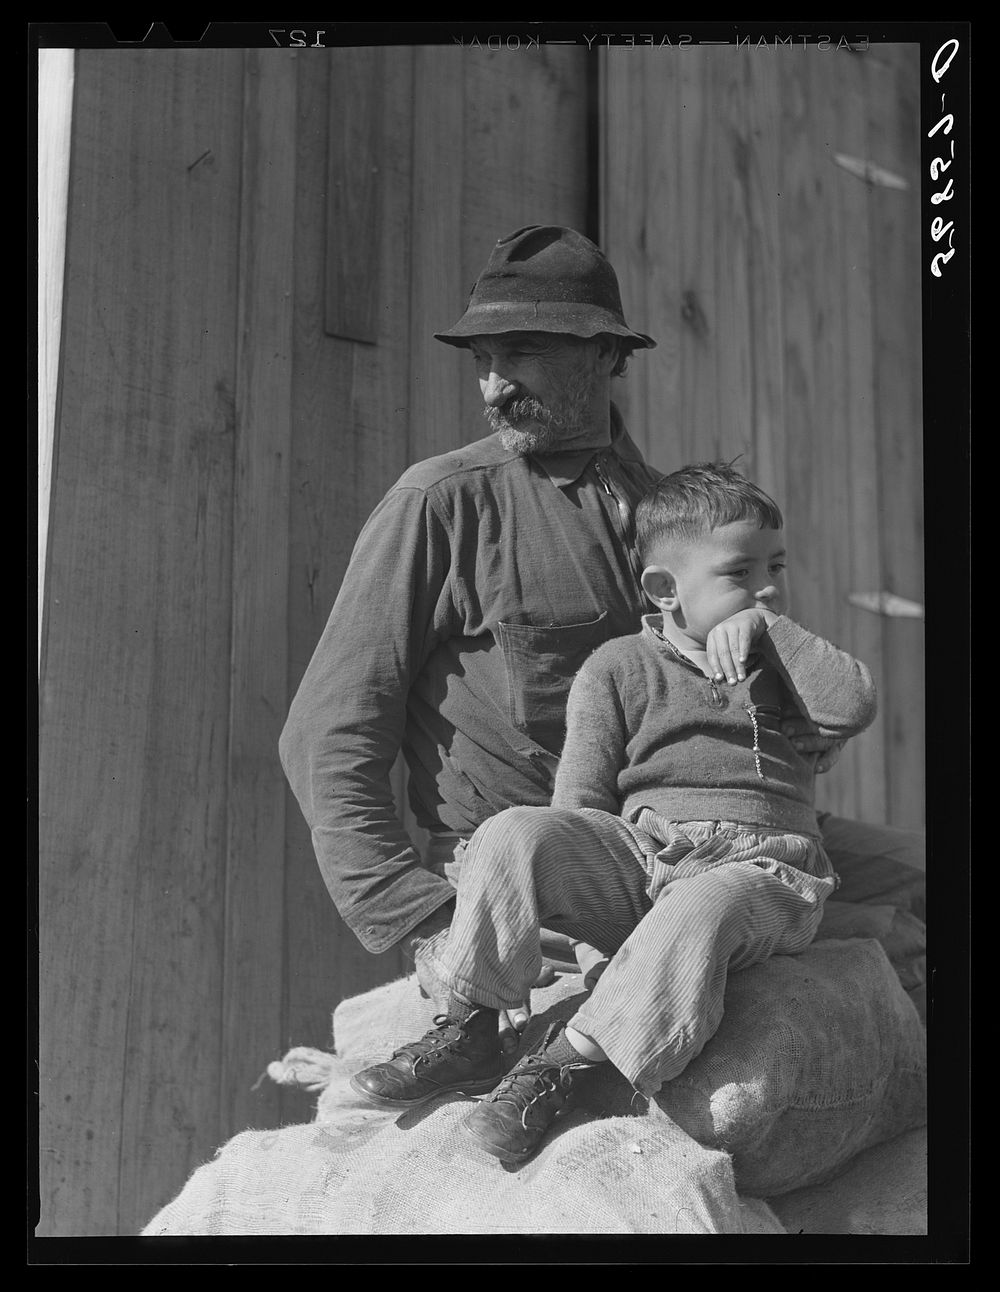 [Untitled photo, possibly related to: Spanish muskrat trapper and his grandson sitting on sacks of dried muskrat pelts, in…